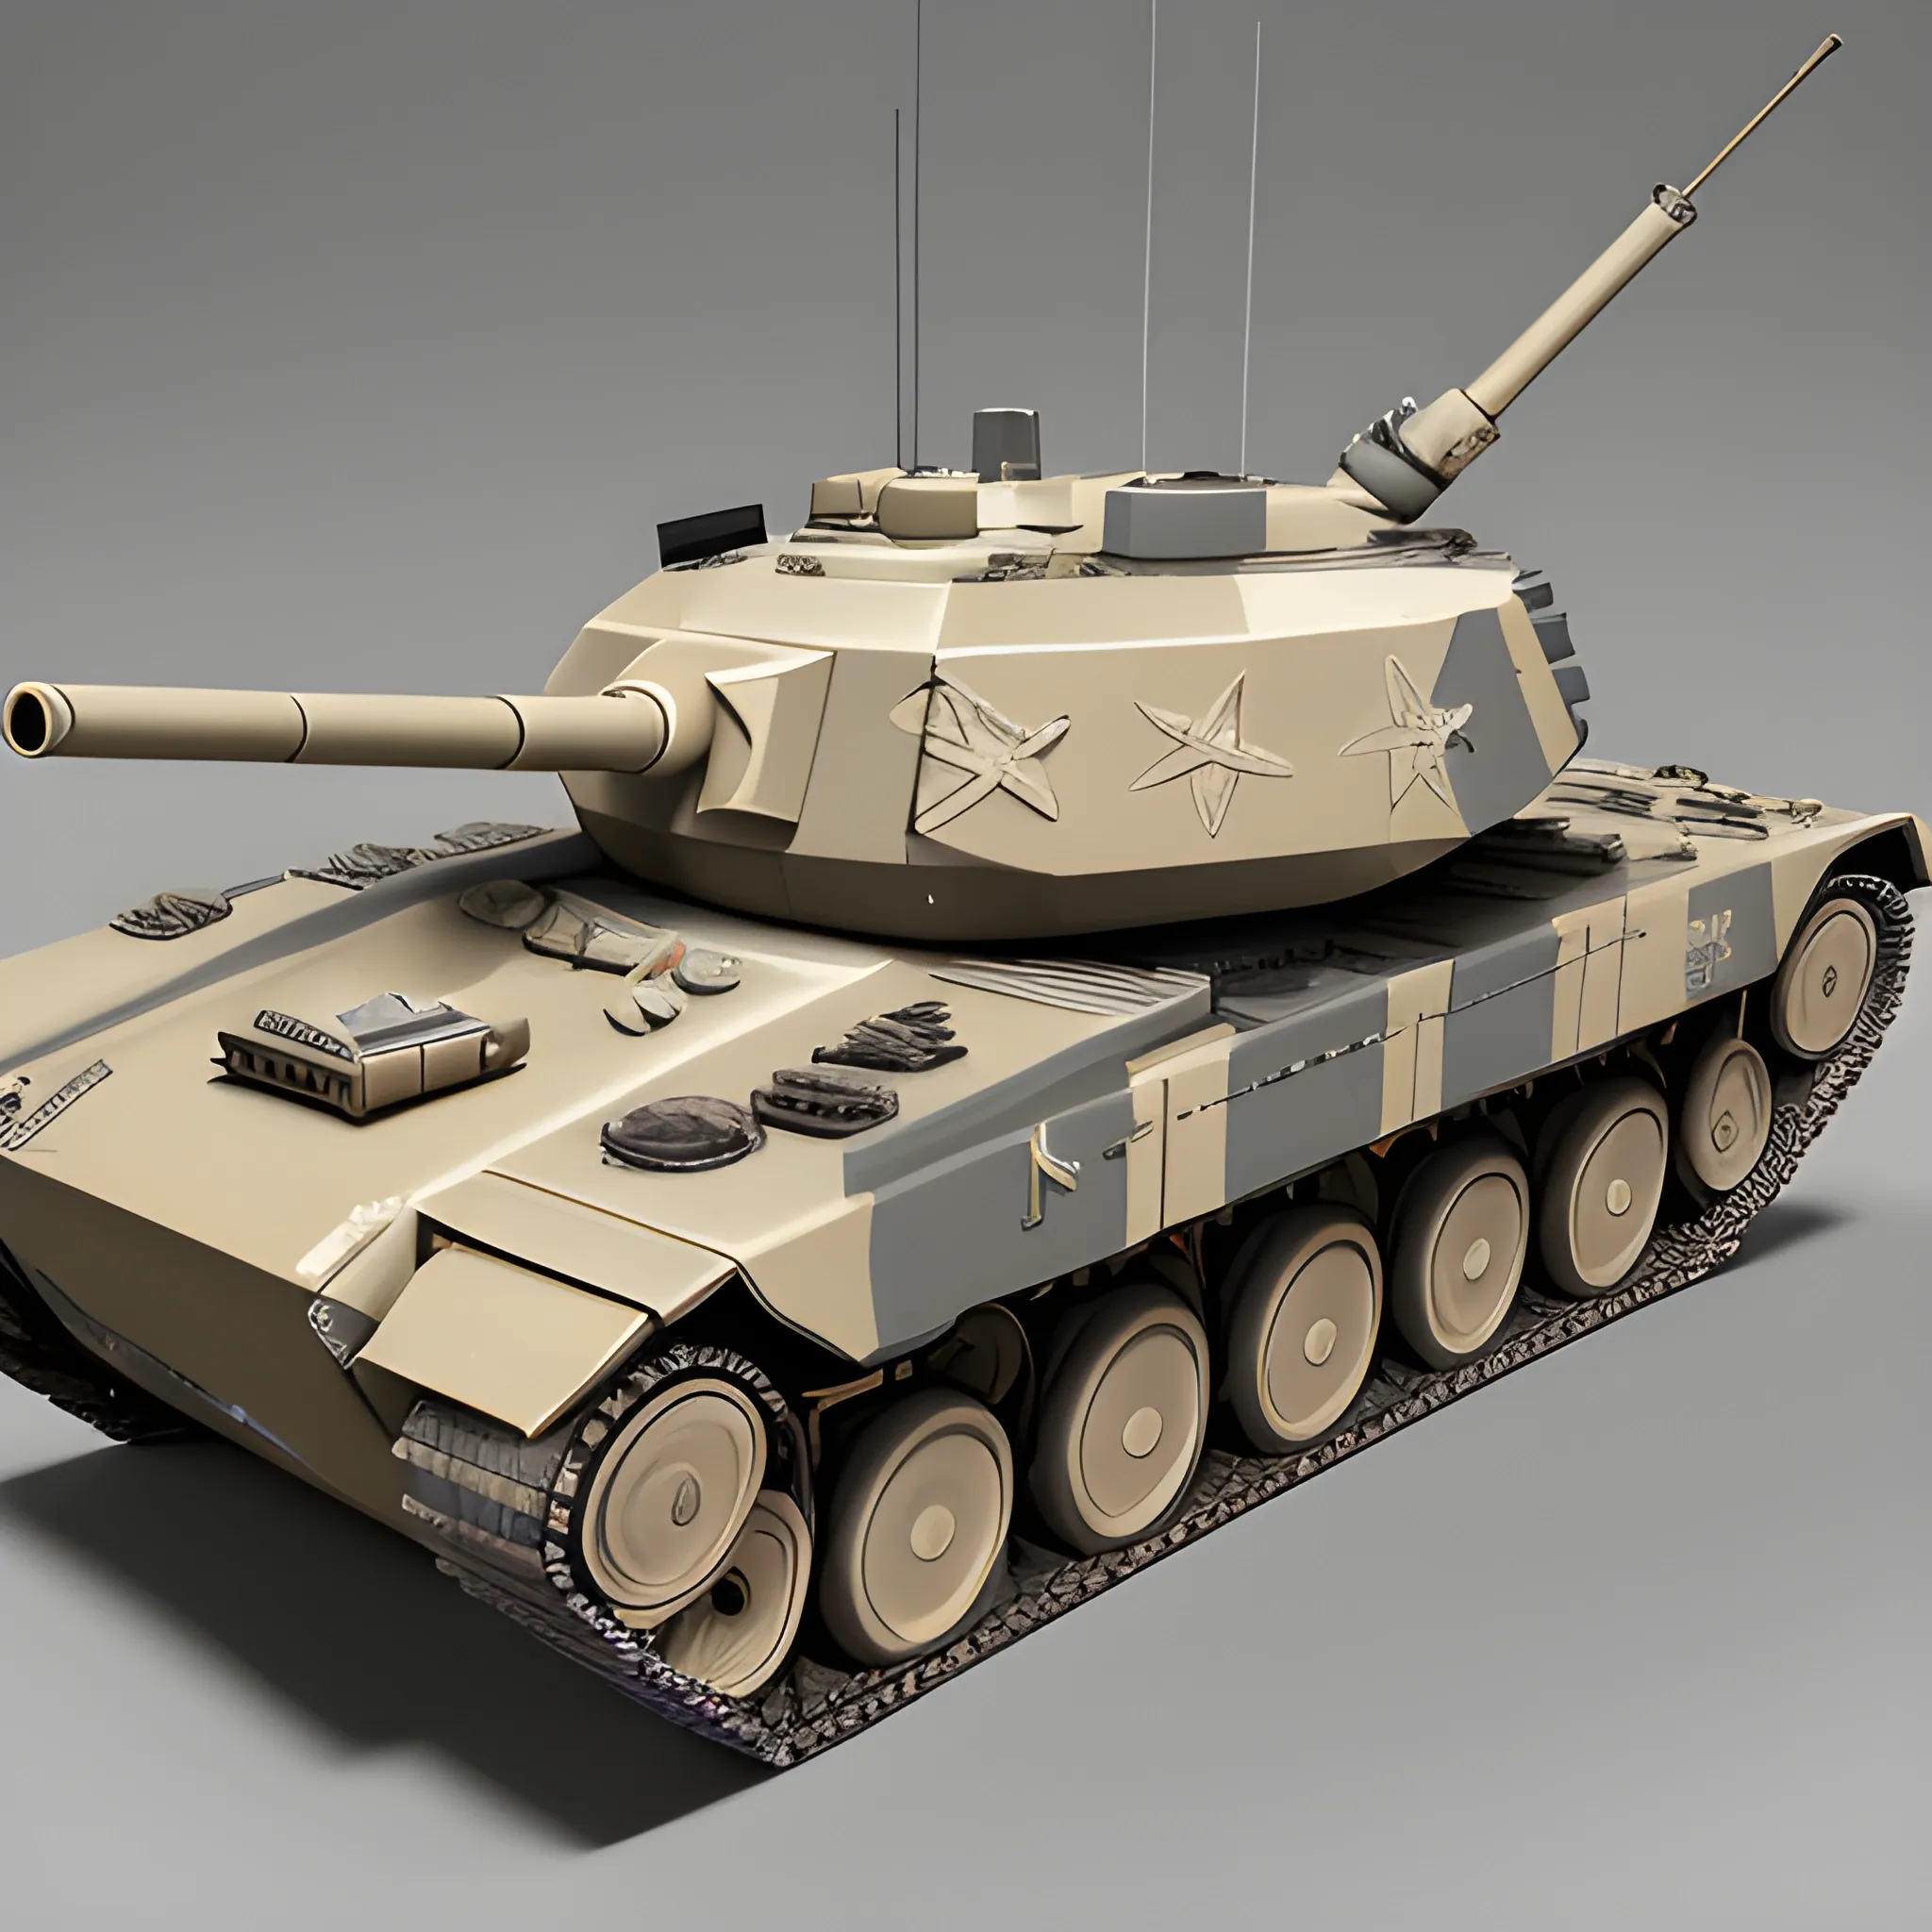 A beautifully crafted tank ，Stickers，
Color Scheme: subdued color palette, light gray, soft beige, professionalism
Visual Focus: high-resolution, weapon model image, clear, rich in detail
Detail Enhancement: lighting effects, reflections, glossiness, shadows, three-dimensionality